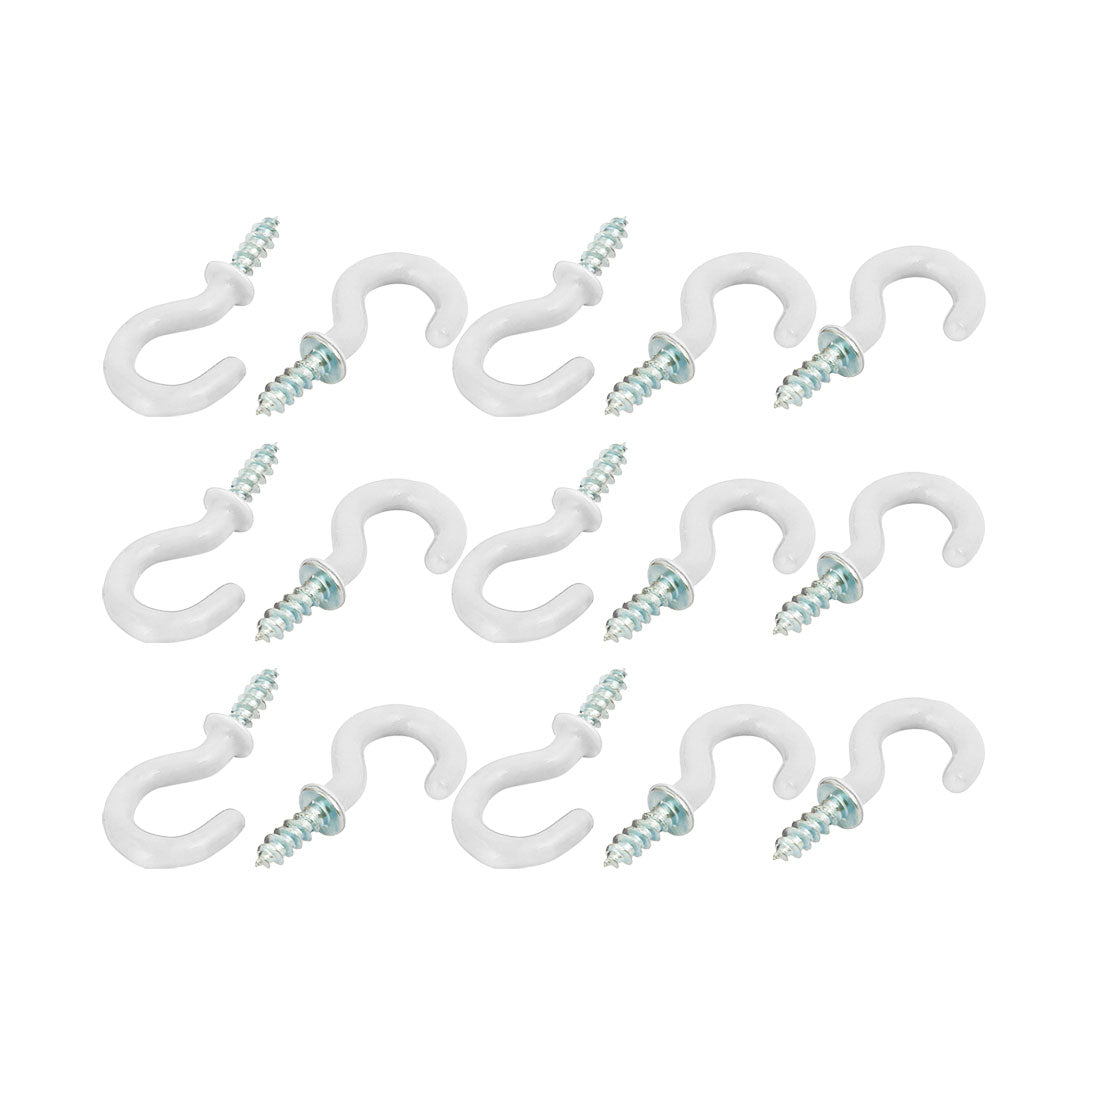 uxcell Uxcell 5/8 Inch Plastic Coated Screw-in Open Cup Ceiling Hooks Hangers White 15pcs